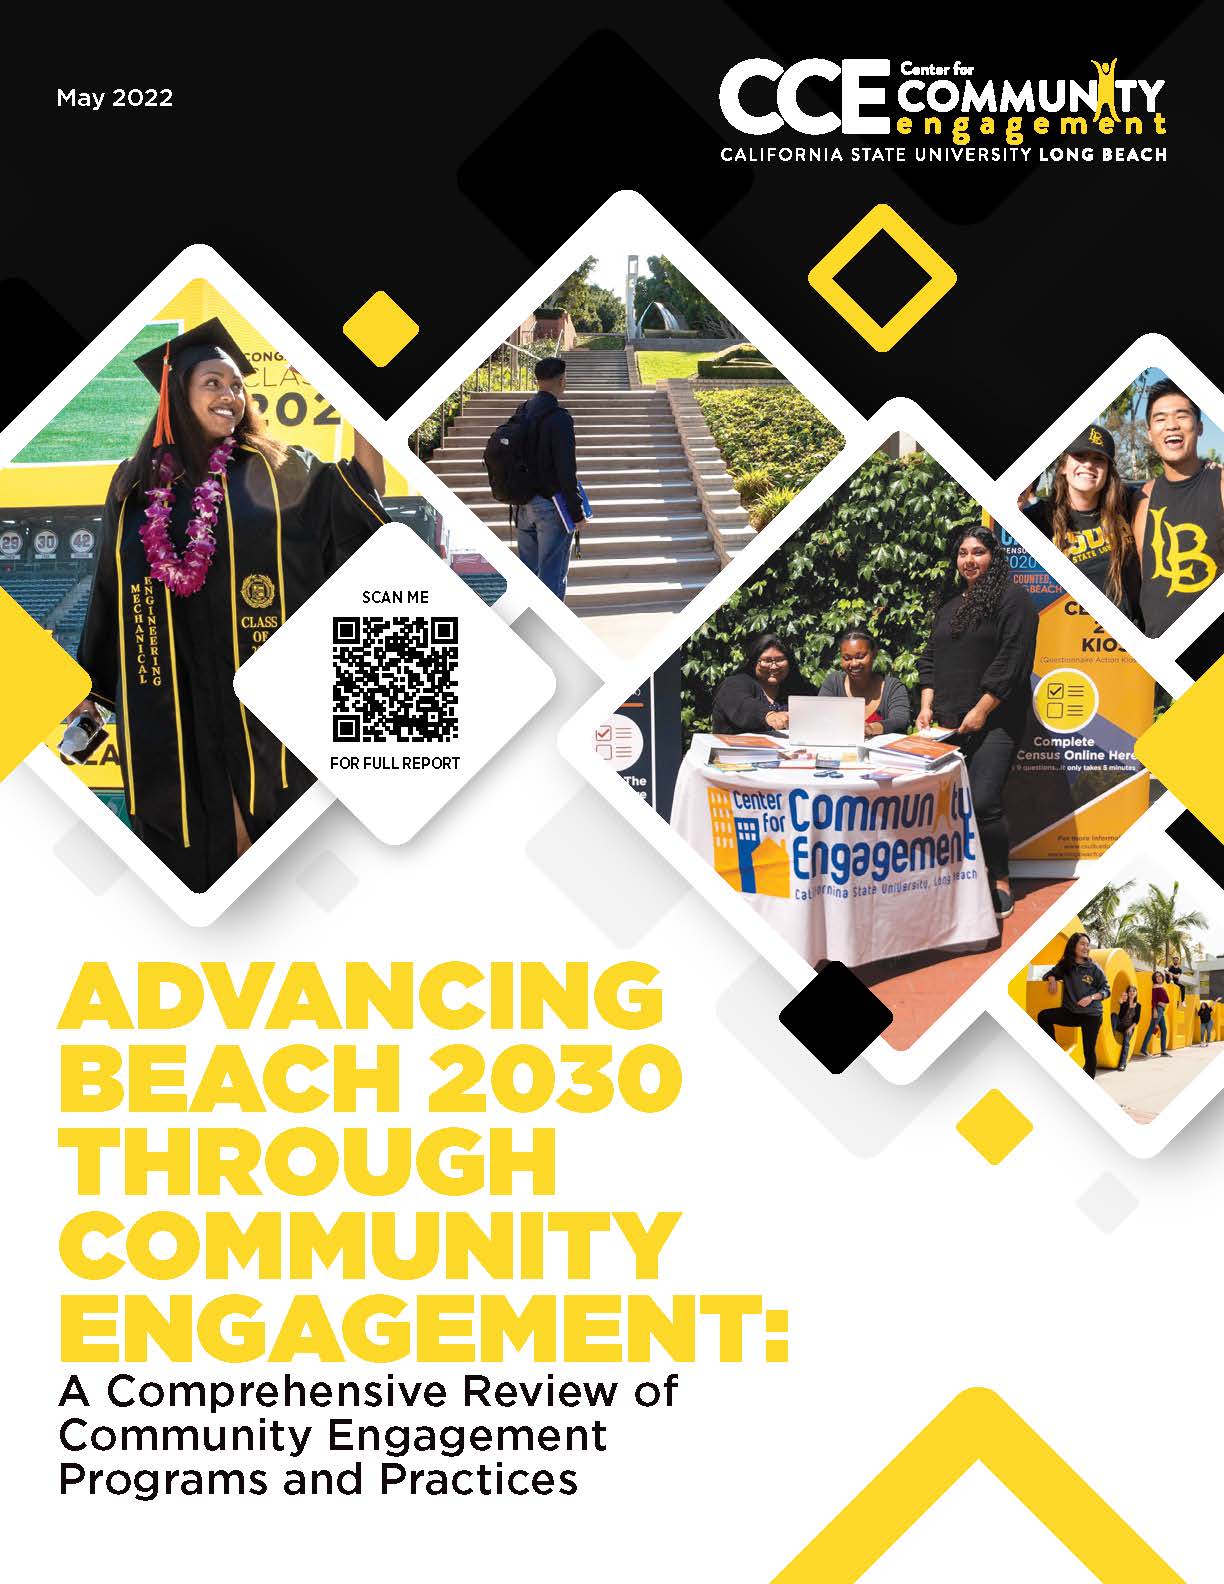 Cover Page of the Executive Summary of the CSULB Center for Community Engagement "Advancing Beach 2030 through Community Engagement" Publication